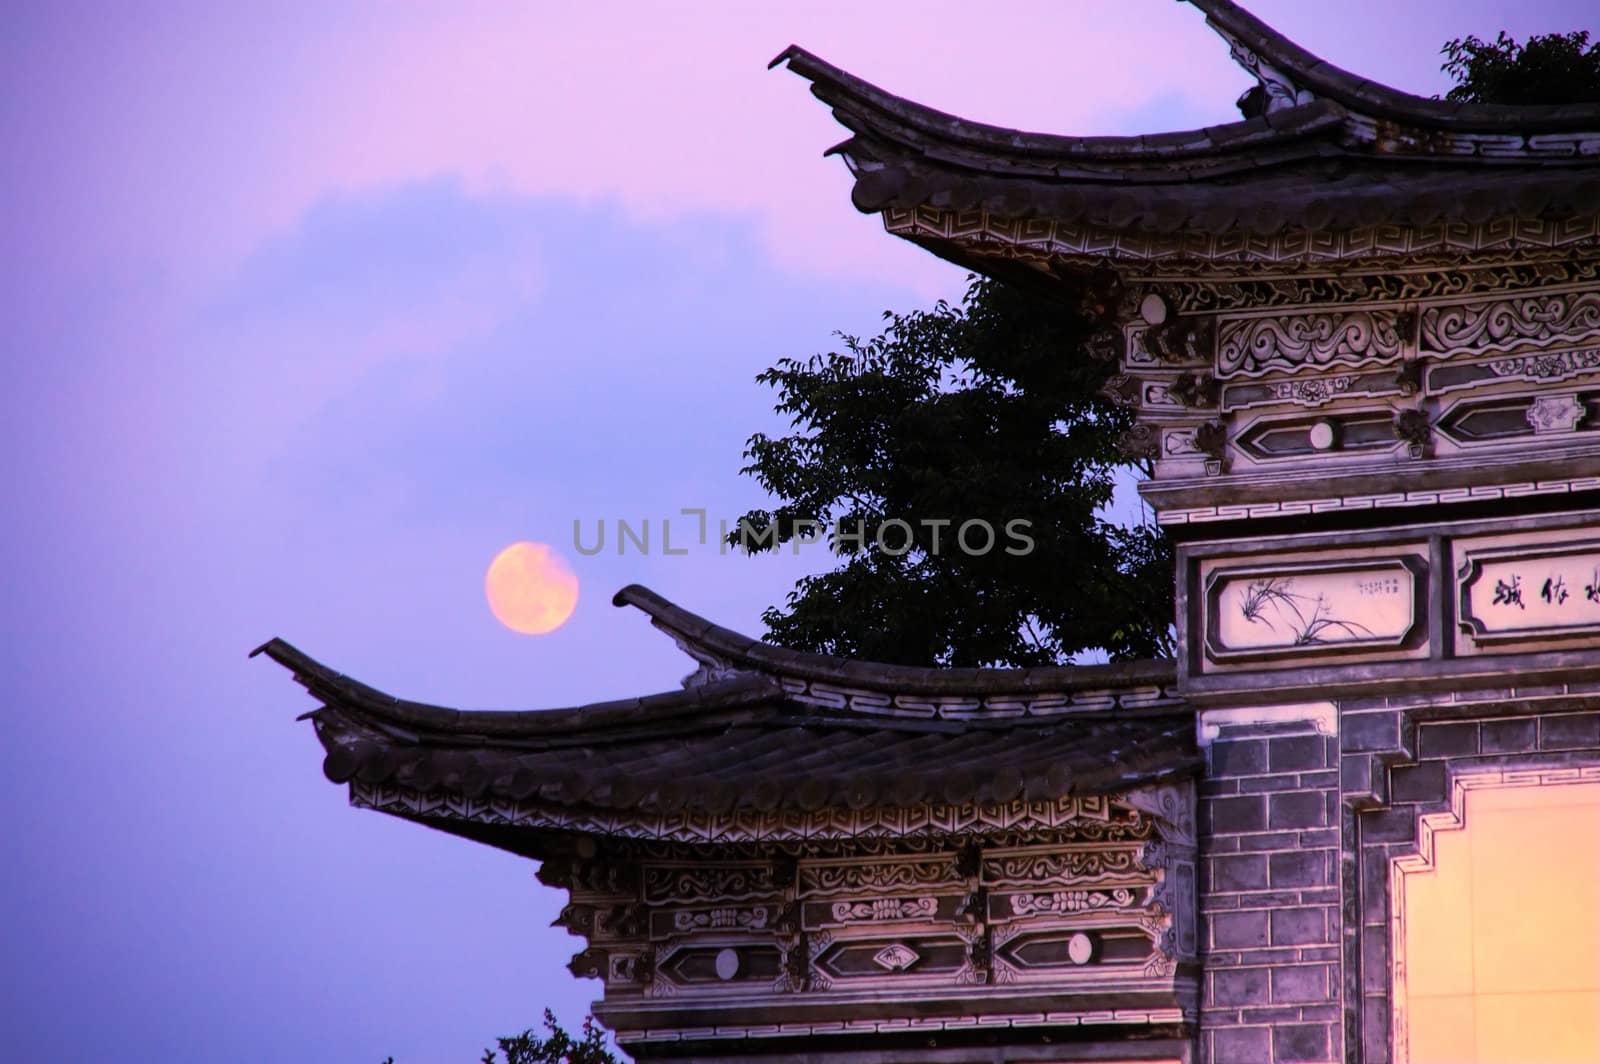 Ancient Chinese architecture over sky and moon, taken at late evening